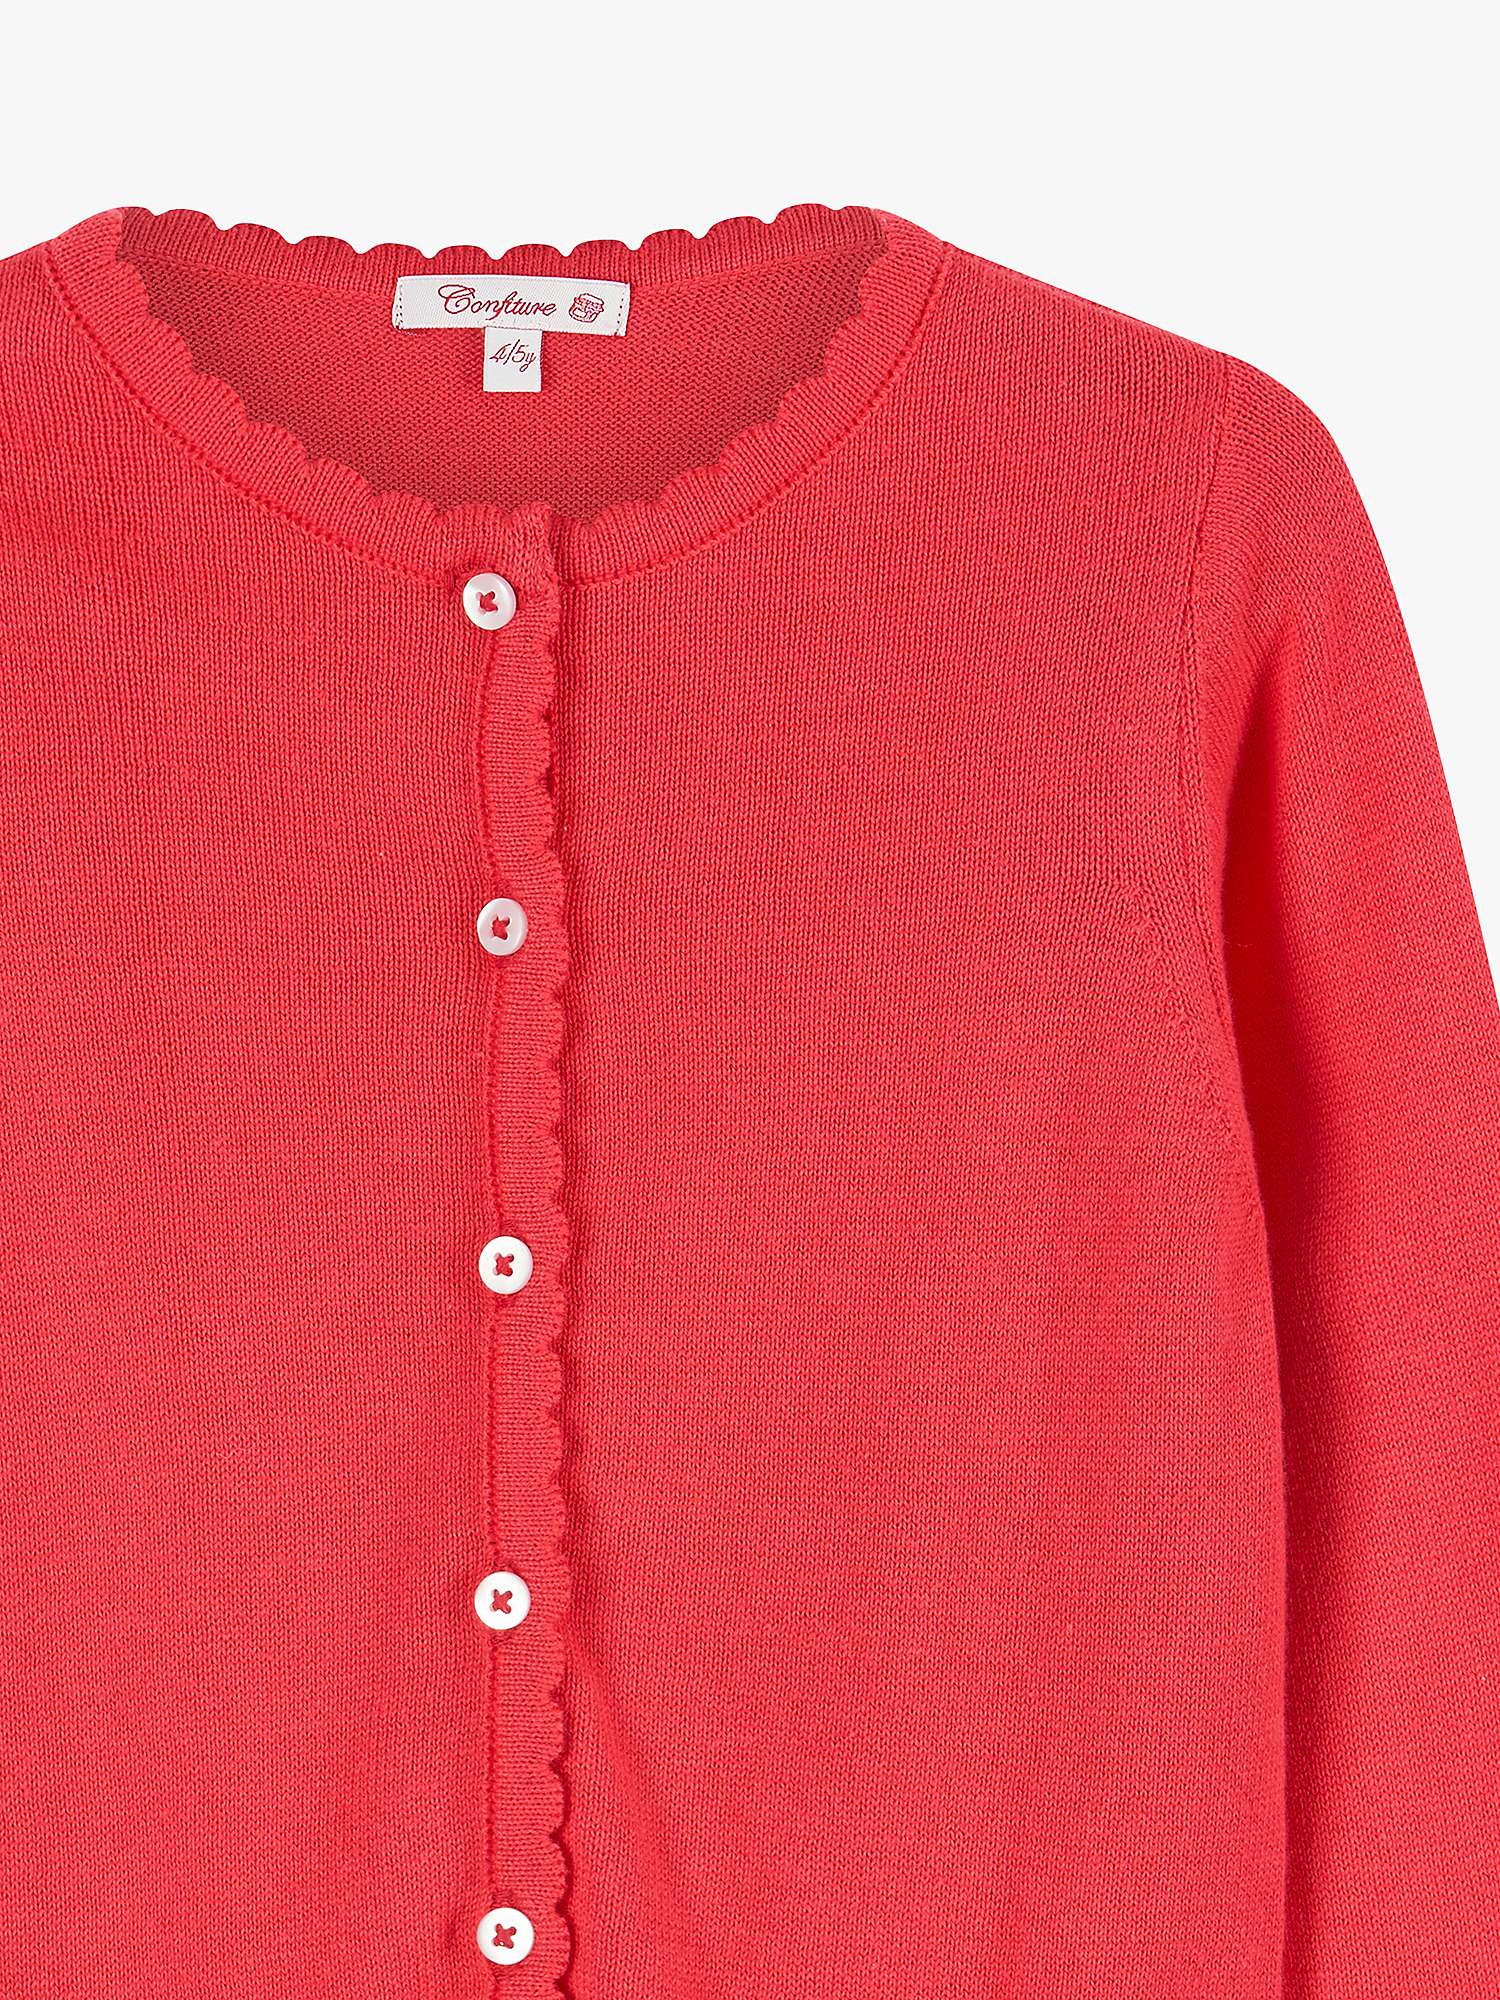 Buy Trotters Kids' Scalloped Edge Cardigan, Watermelon Online at johnlewis.com